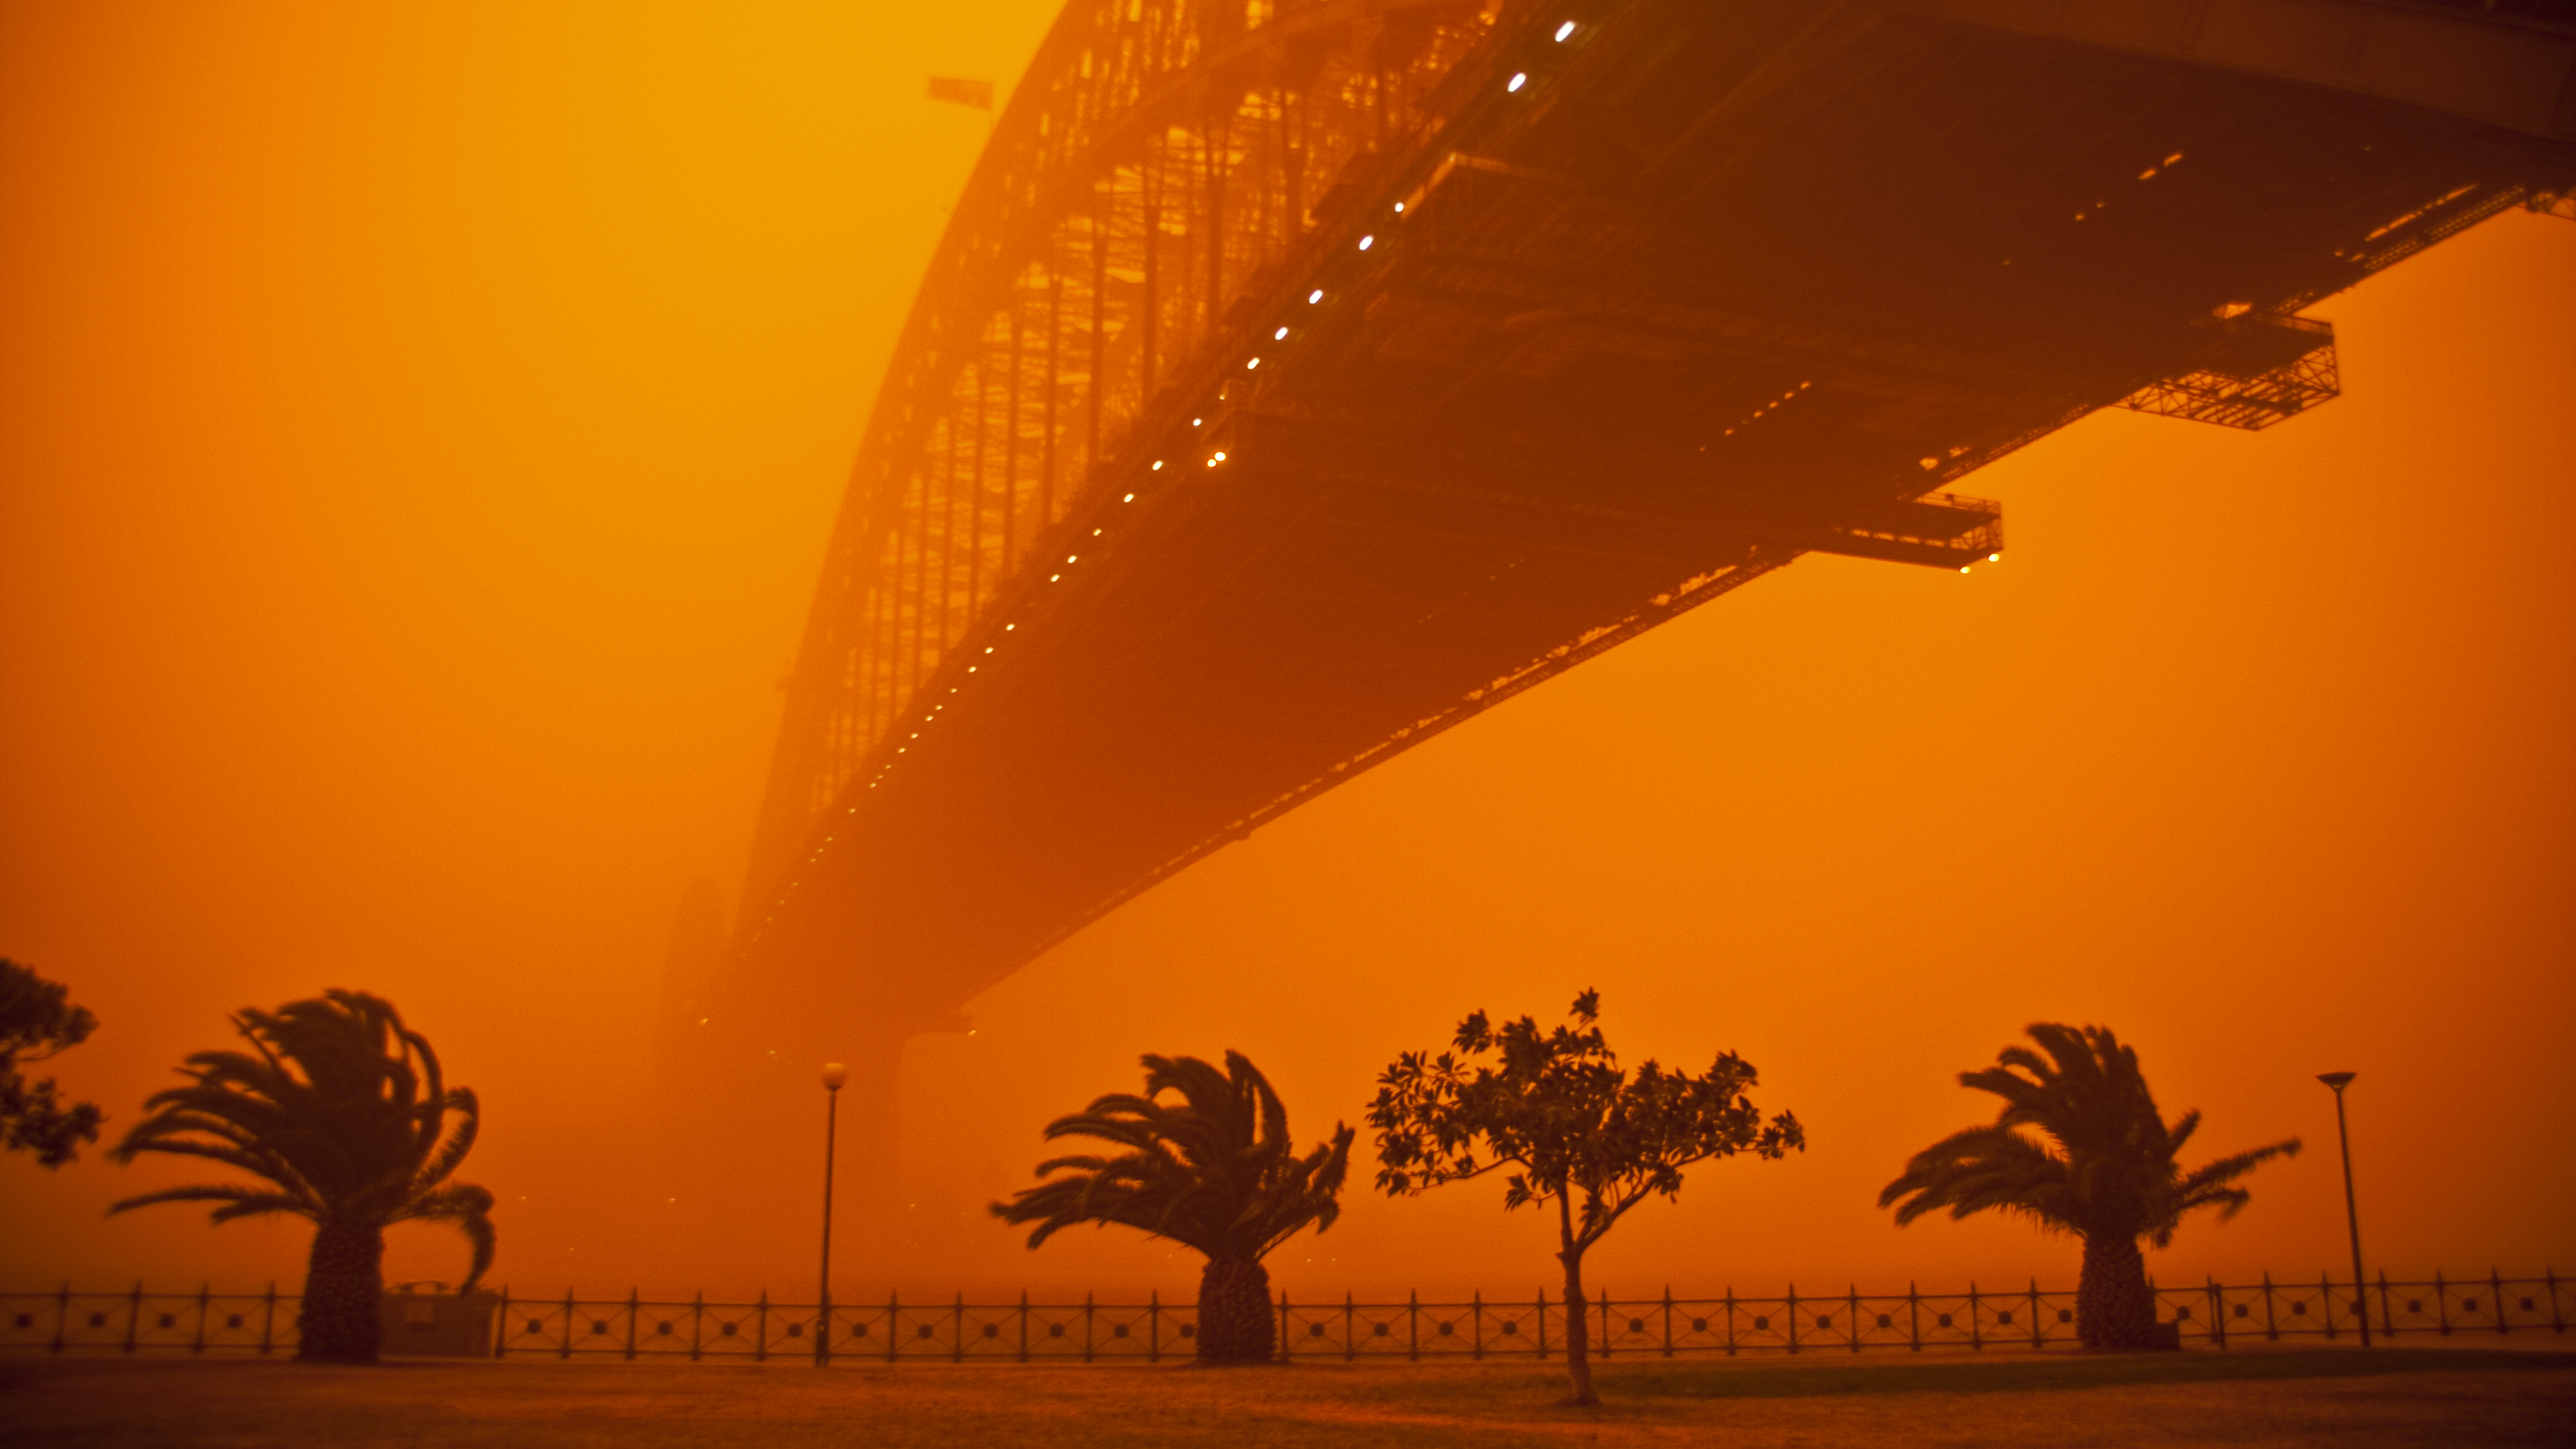 The Sydney Dust Storm in 2009 [3840x2160]